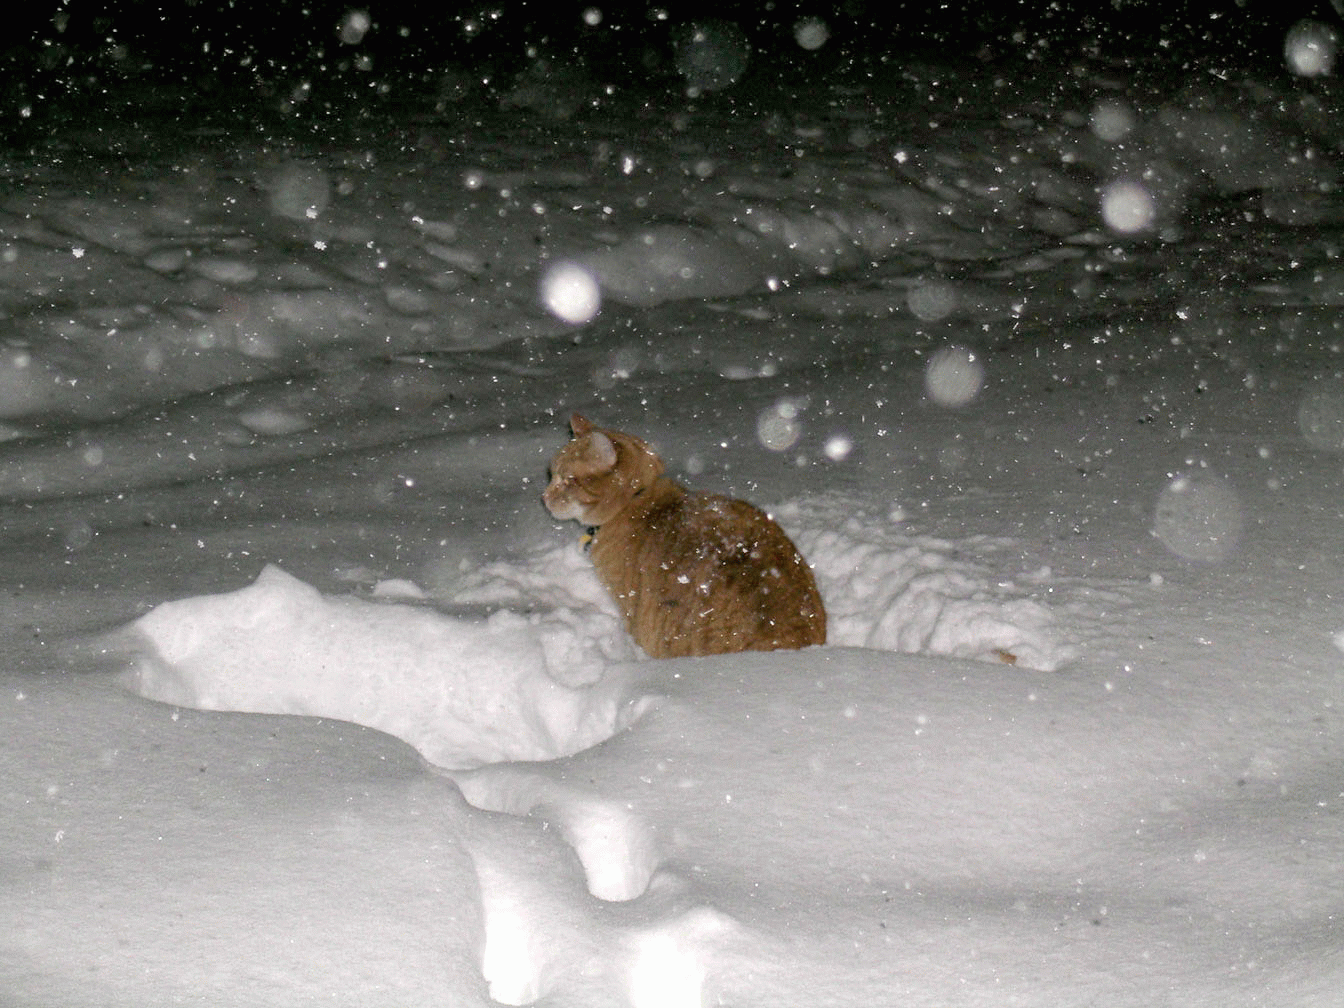 Meyer in the snow animation December, 29, 2006